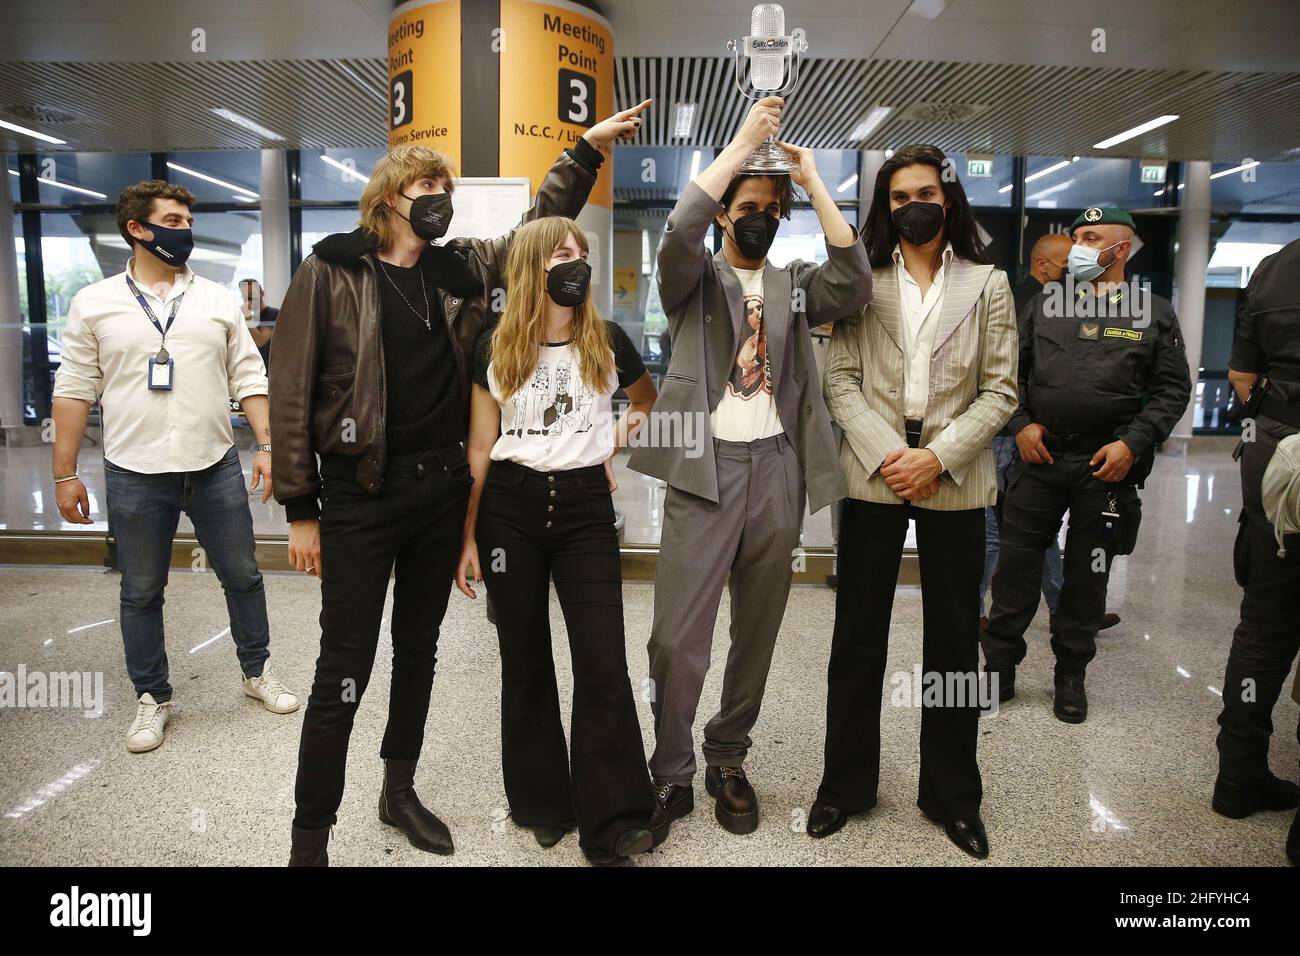 Cecilia Fabiano/ LaPresse May 23 , 2021 Roma (Italy) News : Maneskin arrives at Fiumicino Airport after the victory at Eurovision Song Contest In The Pic : Thomas Raggi, Victoria De Angelis, Damiano David, and Ethan Torchio Stock Photo